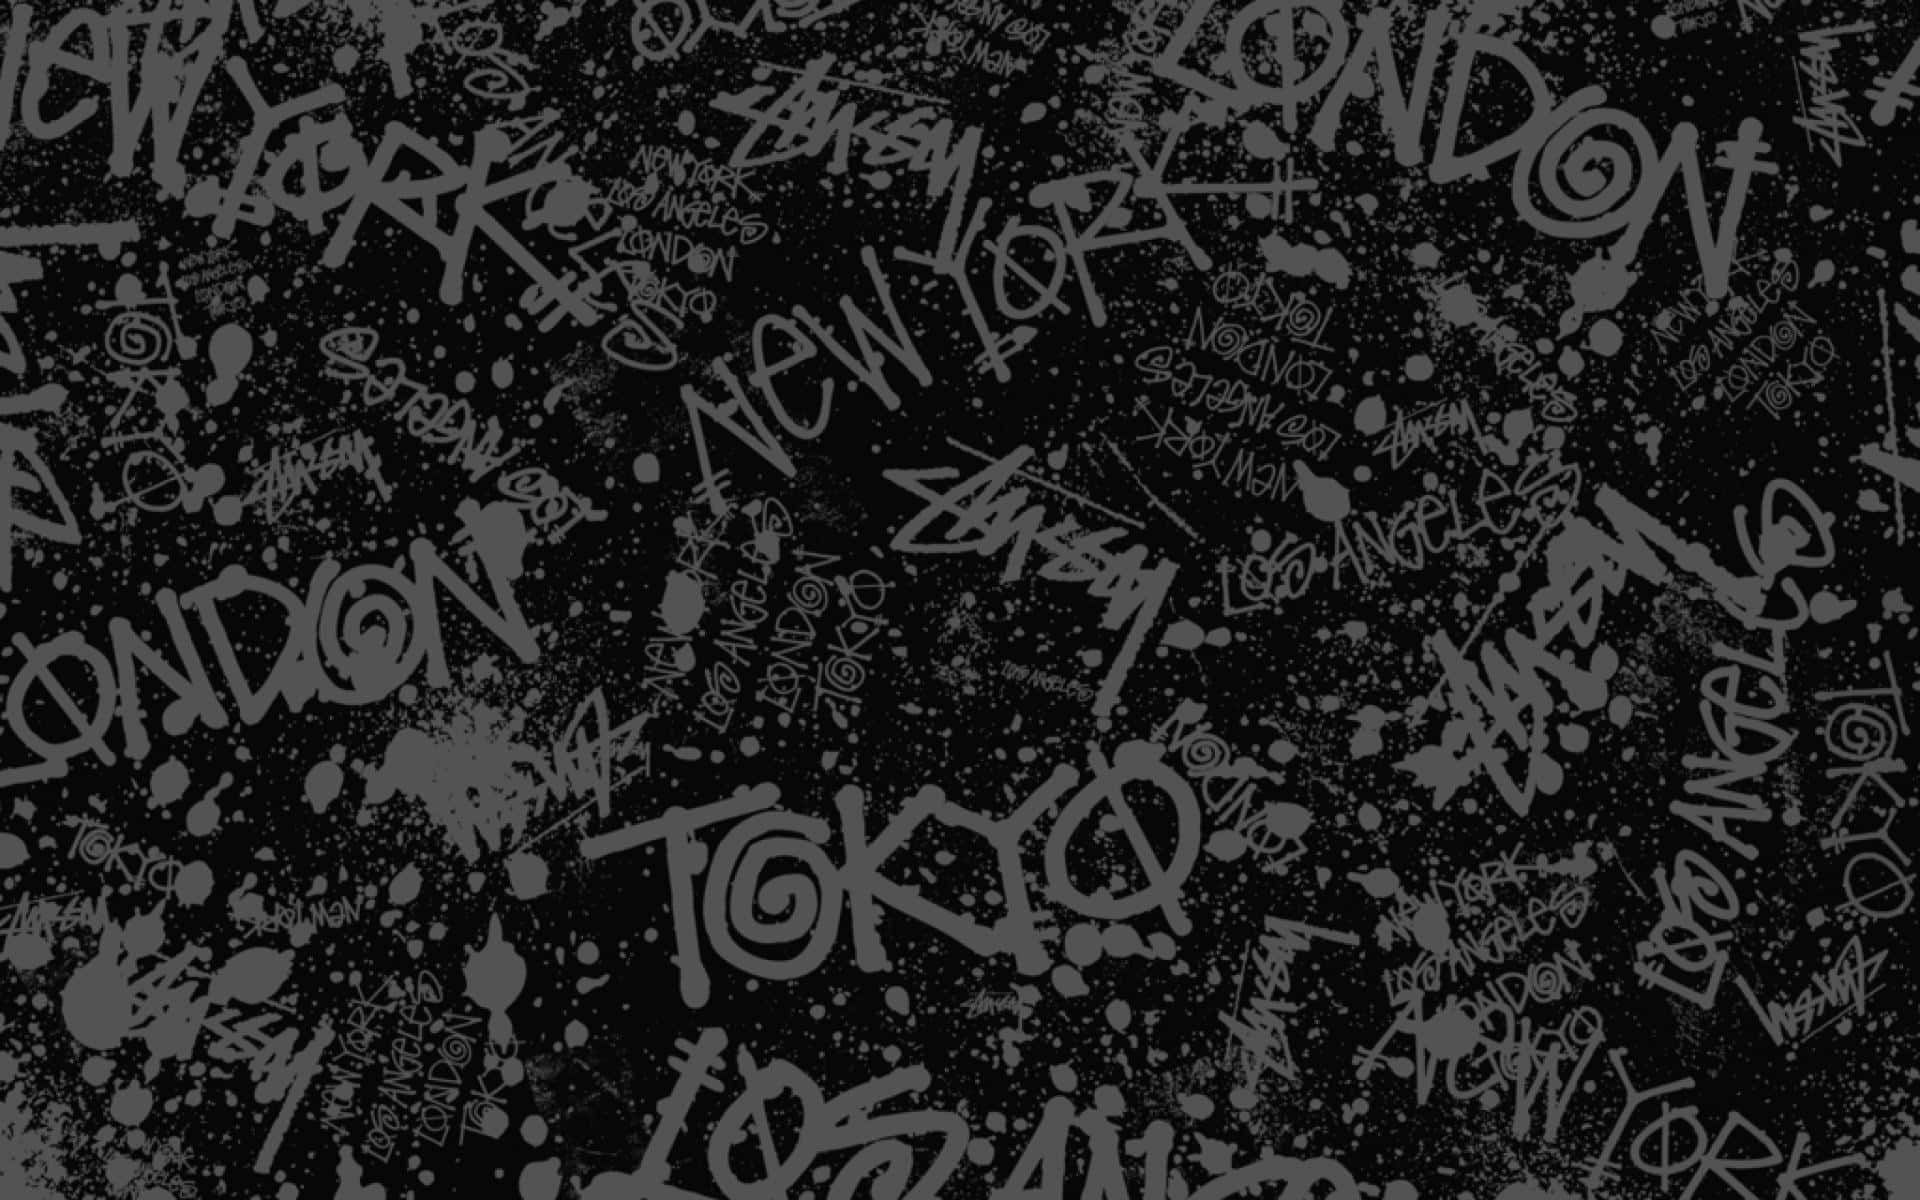 Aesthetic black grunge with a raw and edgy feel Wallpaper